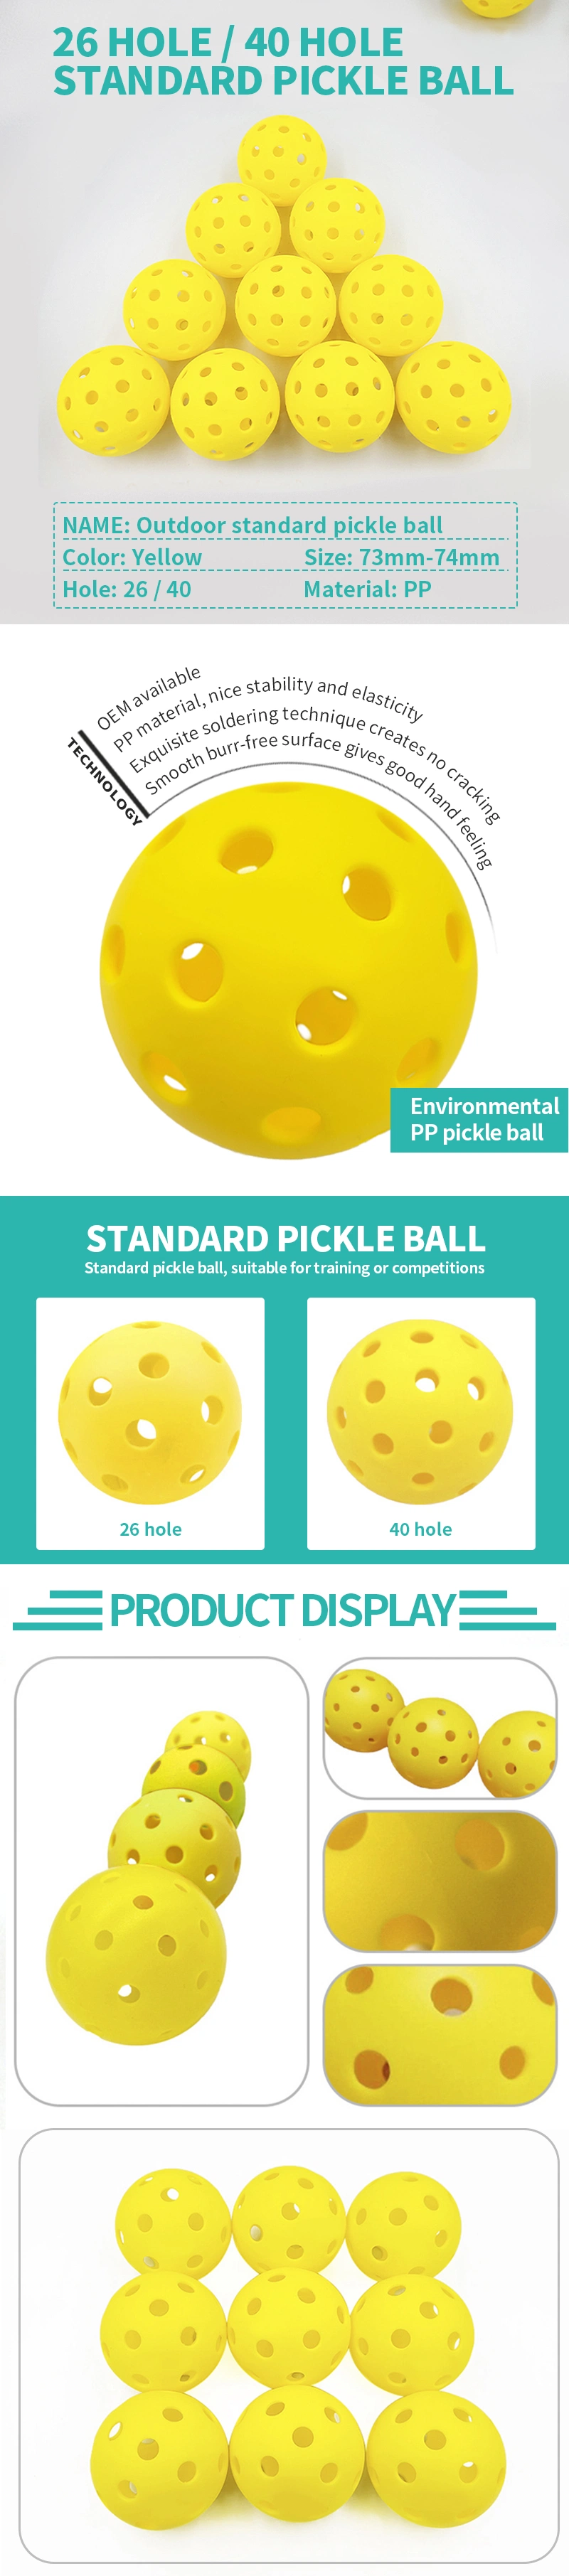 Good Quality Pickle Ball Game Custom Usapa Standard 40 Hole for Outdoor